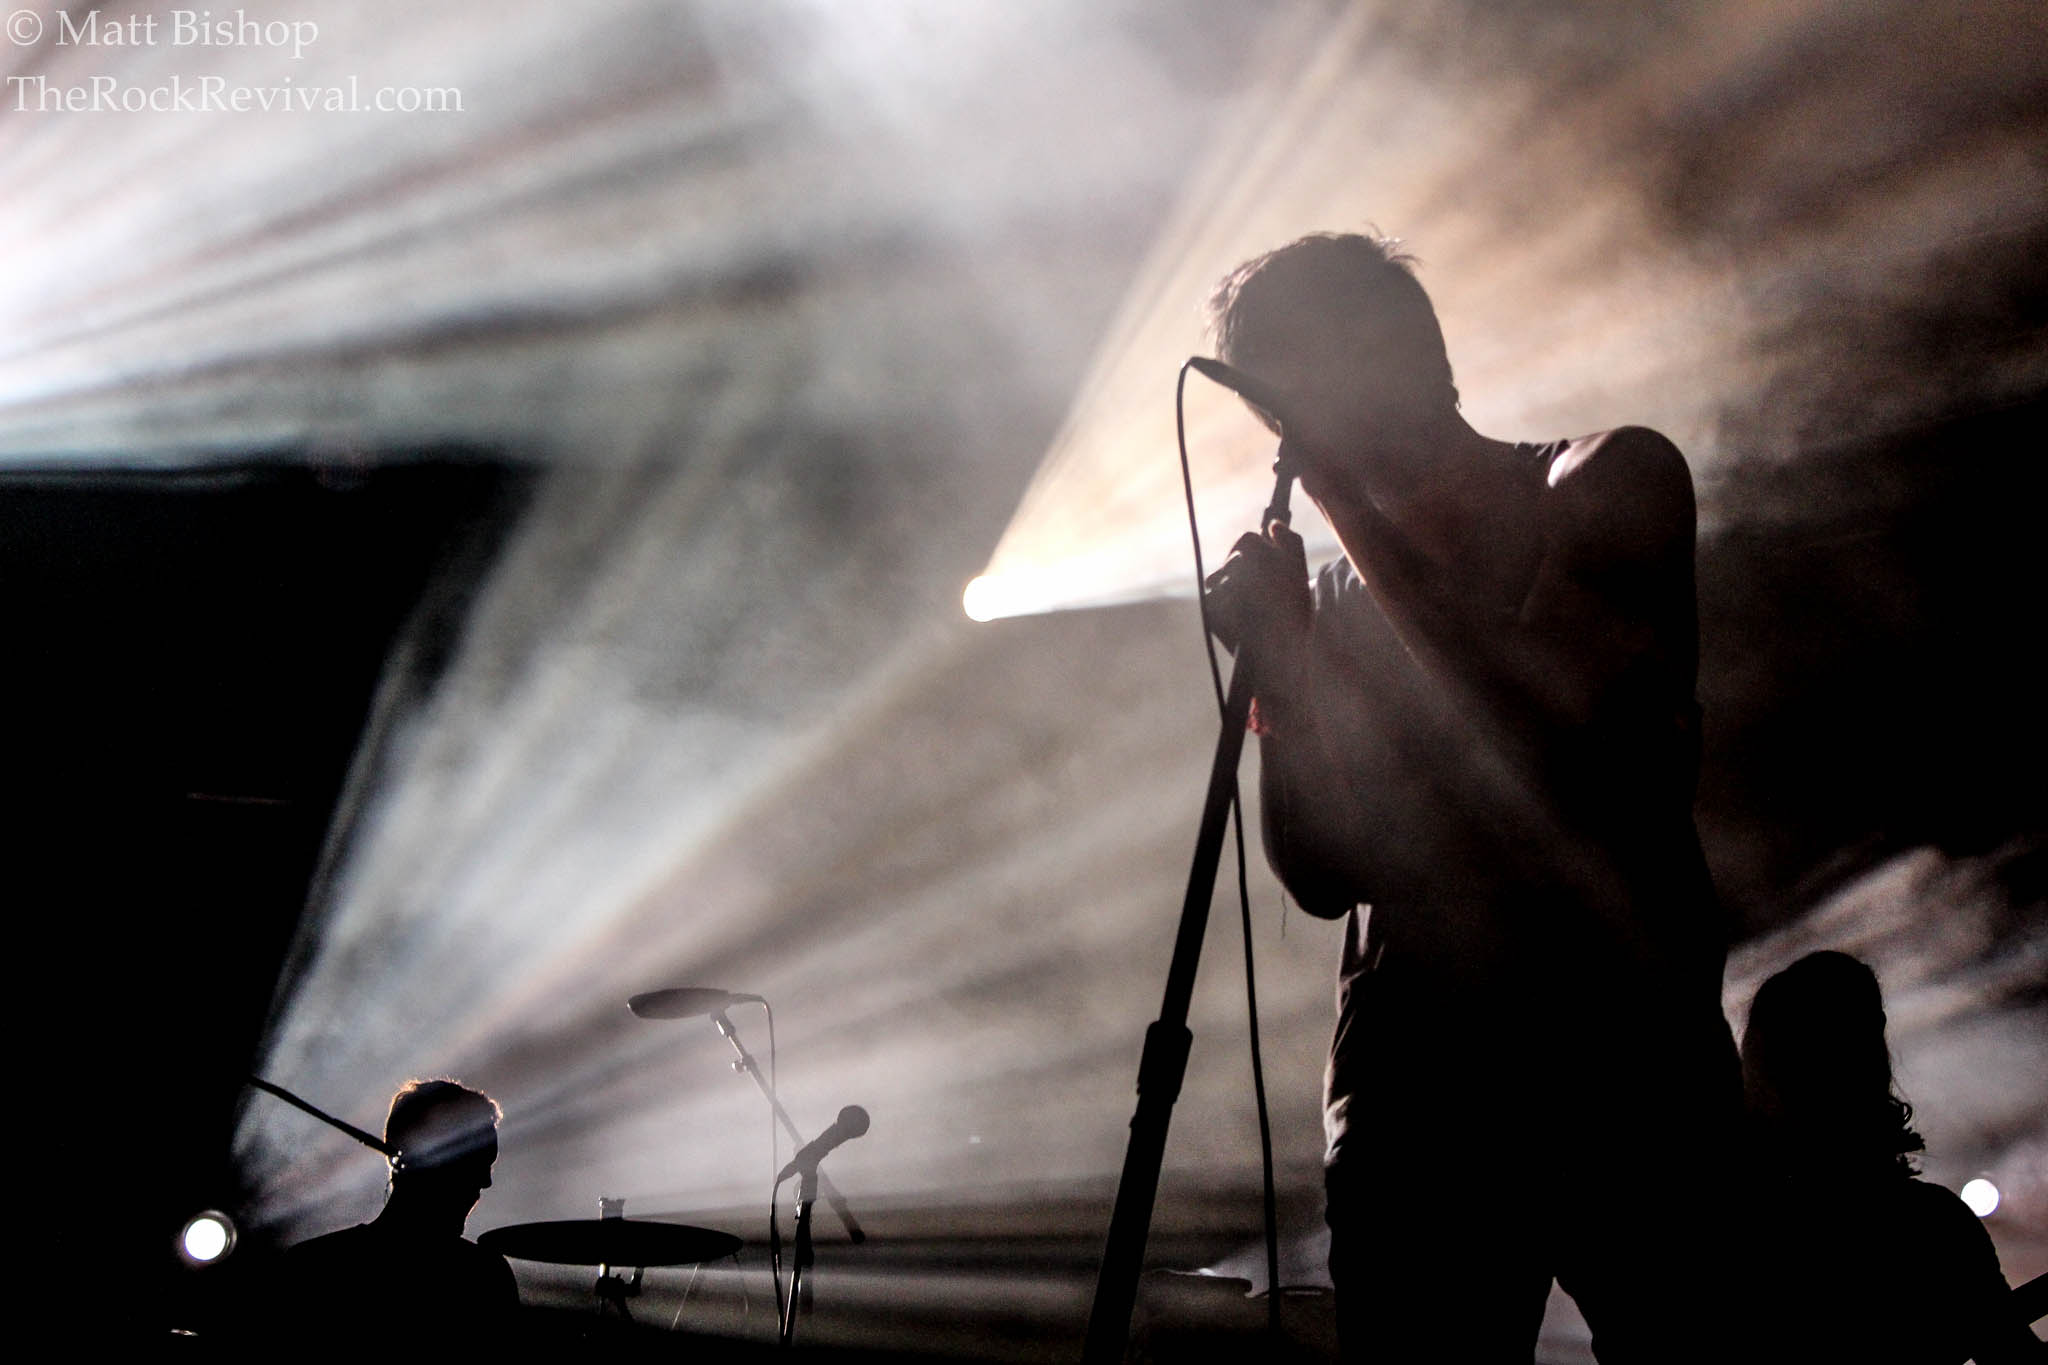 YOUNG THE GIANT ANNOUNCE MIND OVER MATTER TOUR 2014 - The Rock Revival